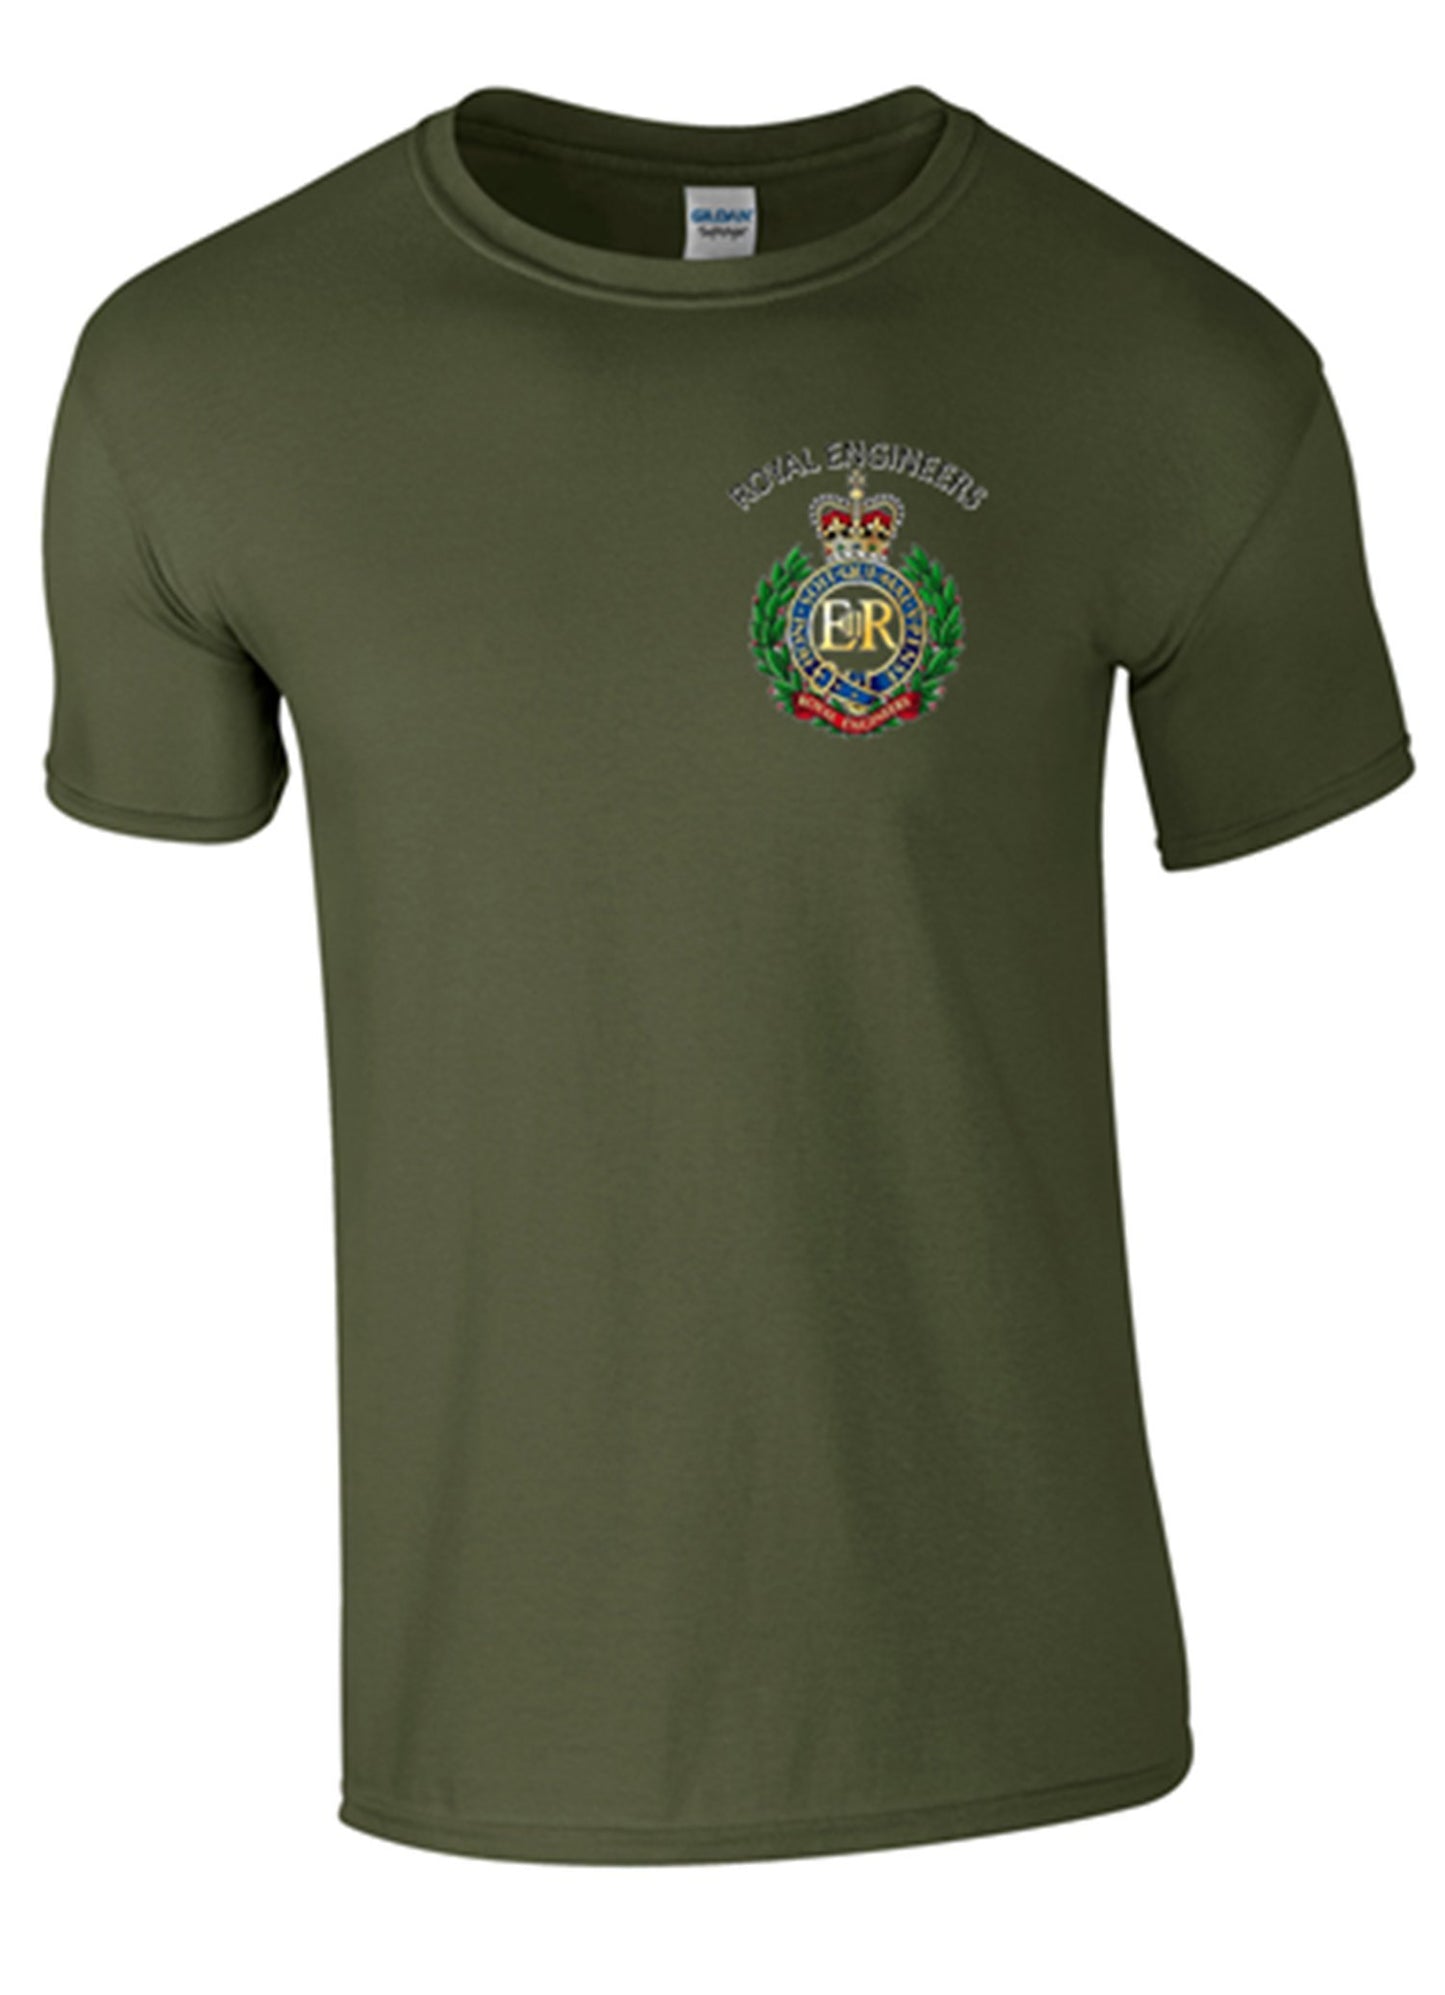 Bear Essentials Clothing. Royal Engineers T-Shirt Double Print in Colour - Army 1157 kit Green / M Army 1157 Kit